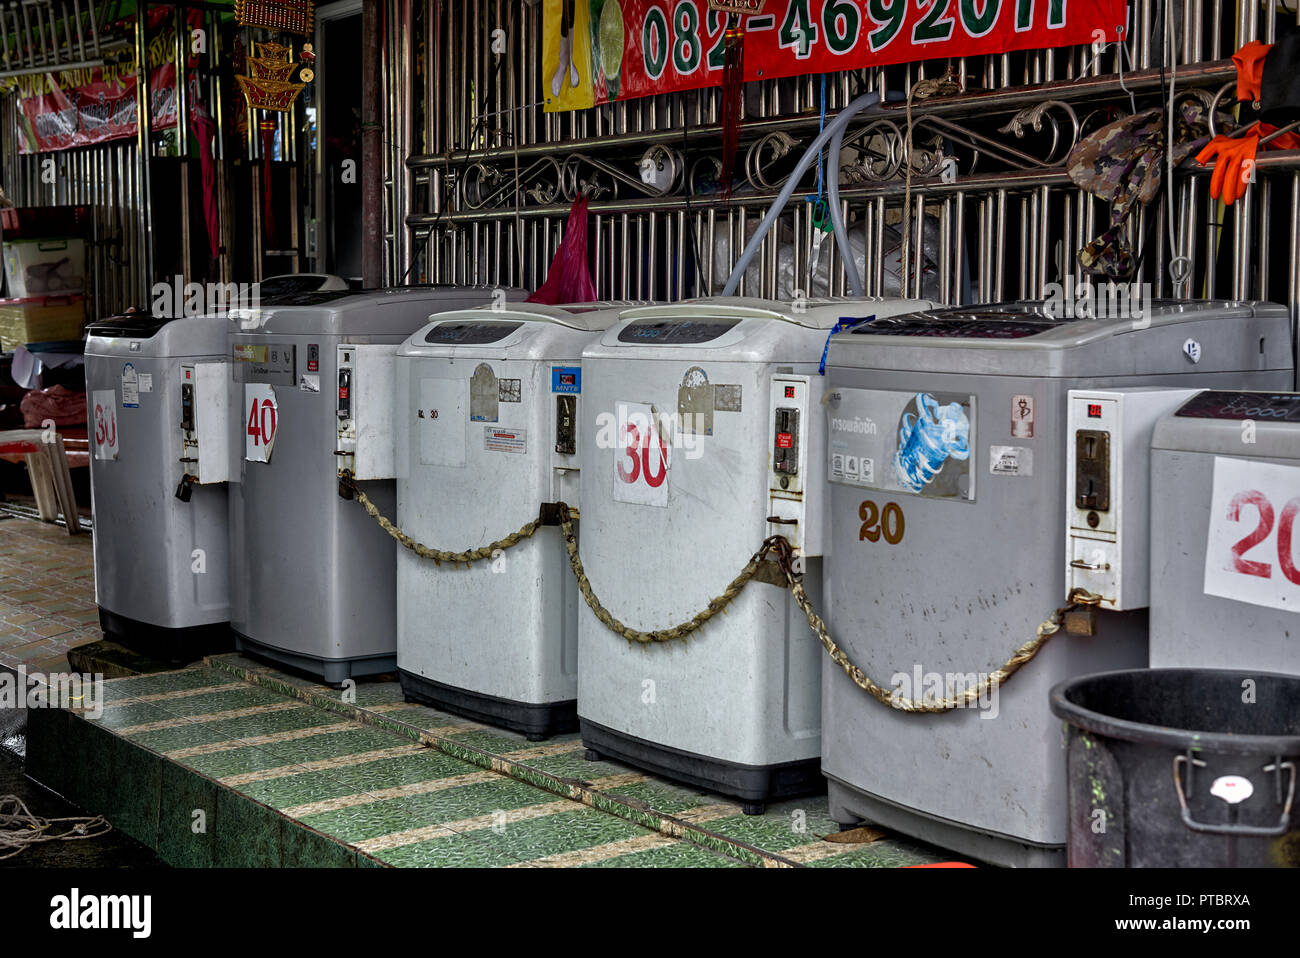 Washing machines. Coin operated self service street launderette . Thailand Southeast Asia Stock Photo